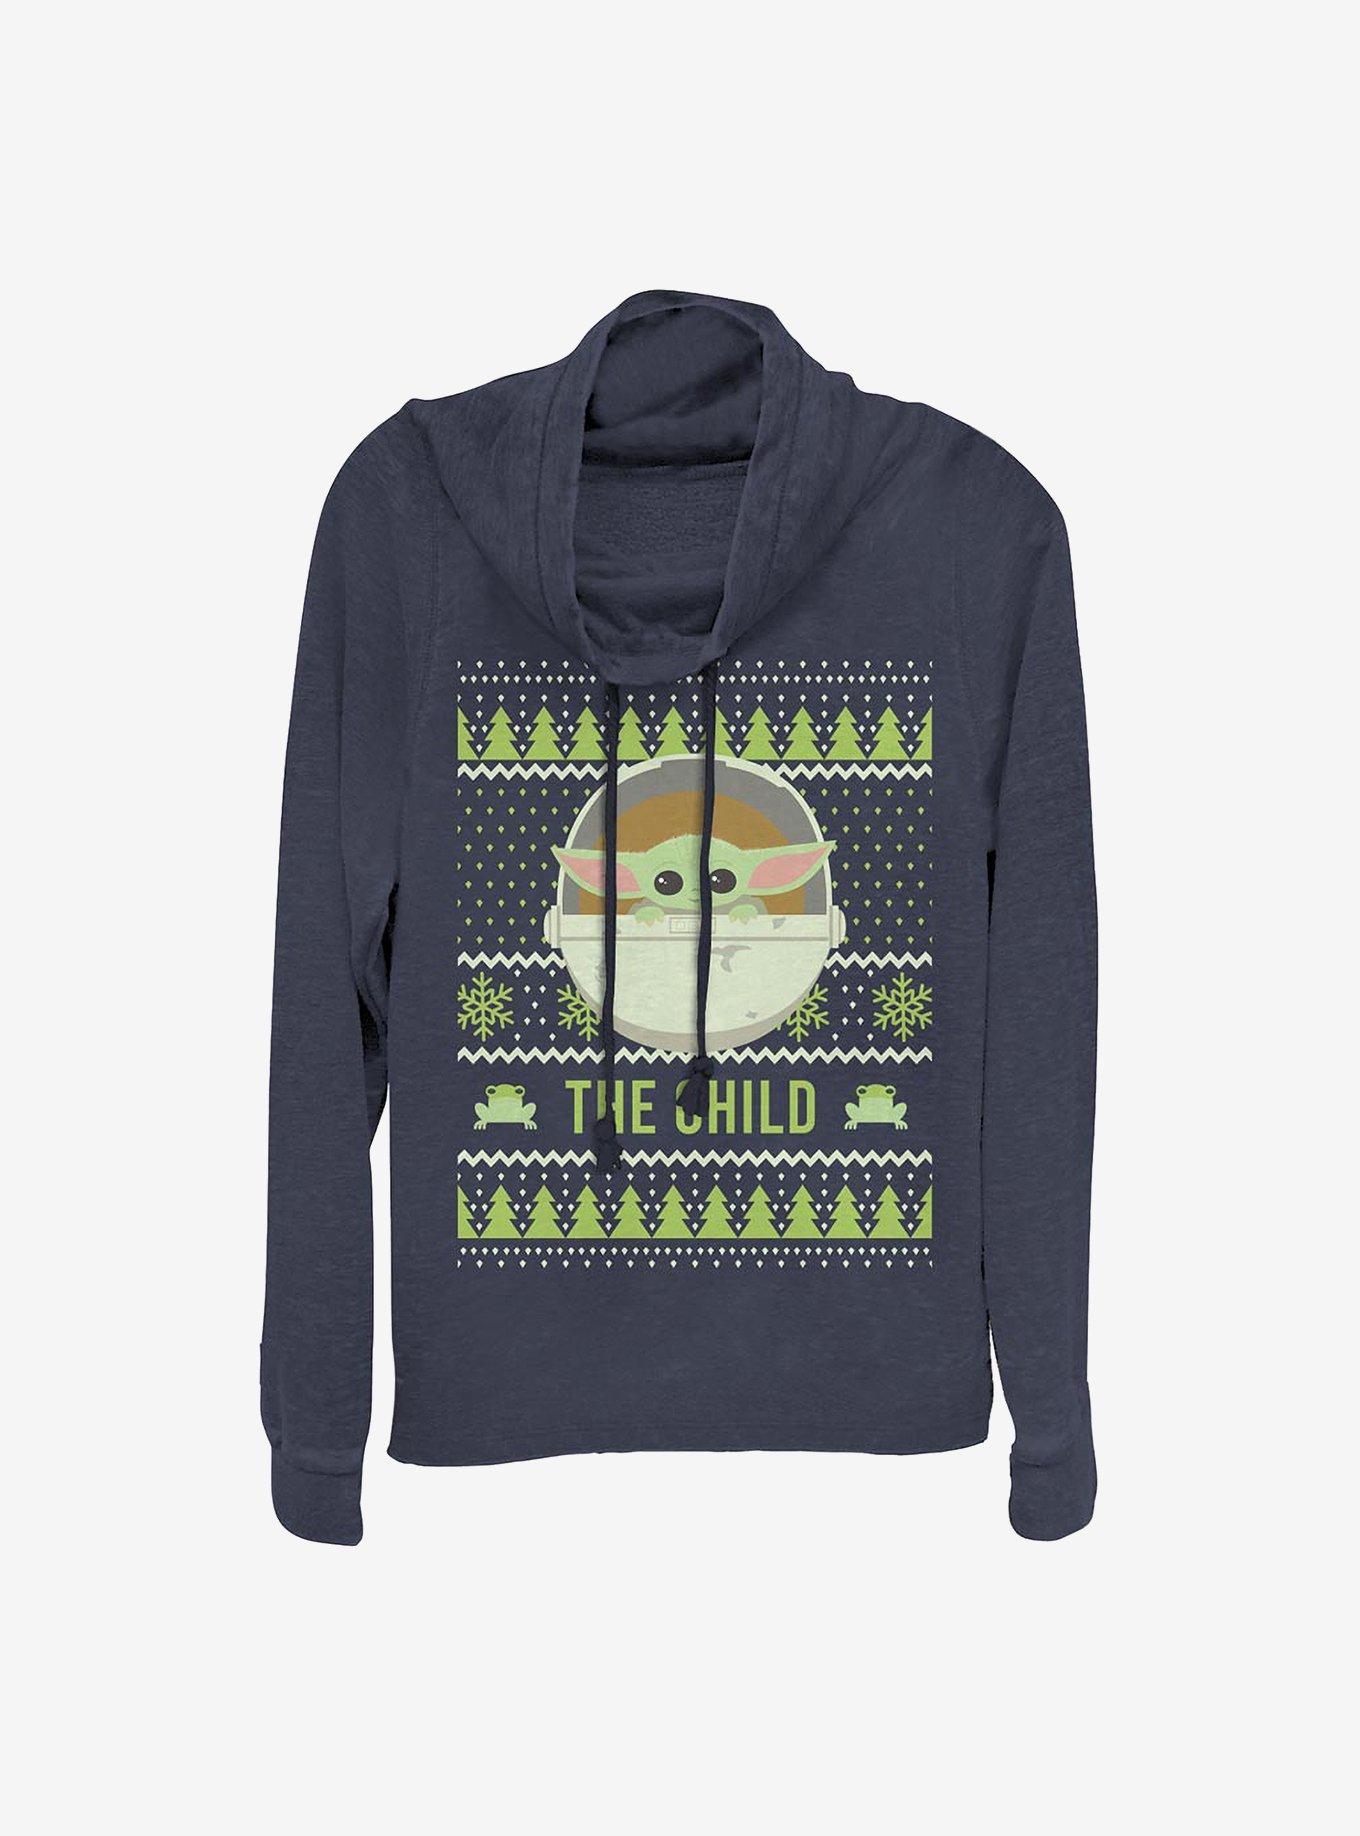 Star Wars The Mandalorian The Child Cute Ugly Sweater Cowlneck Long-Sleeve Girls Top, NAVY, hi-res